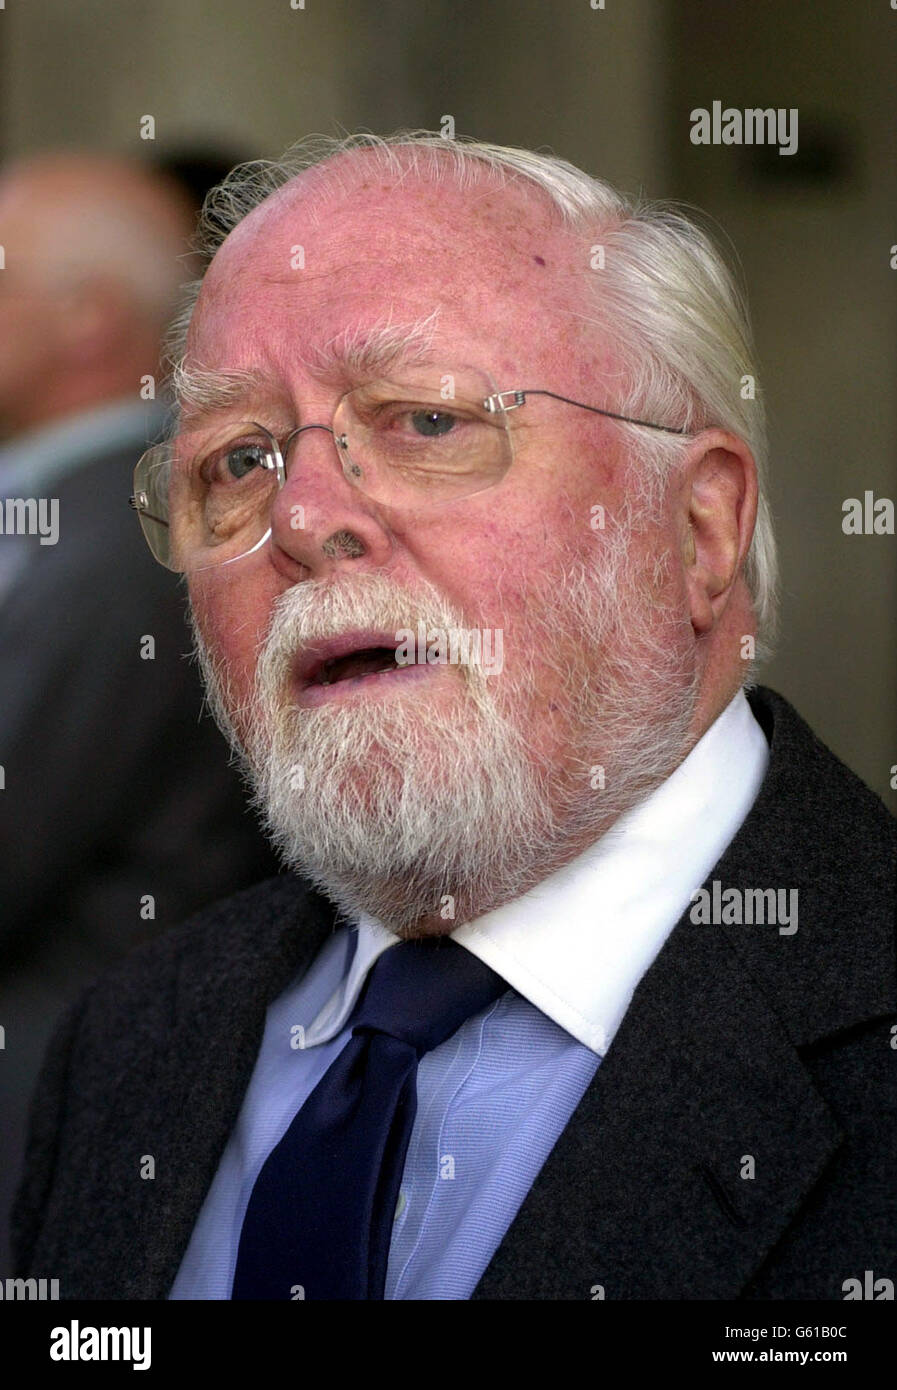 Lord Richard Attenborough arrives at St Martin-In-The-Fields in central London, for the memorial service for actor John Thaw. Around 800 people gathered to remember the actor most famous for playing Inspector Morse, who died in 2001. Stock Photo